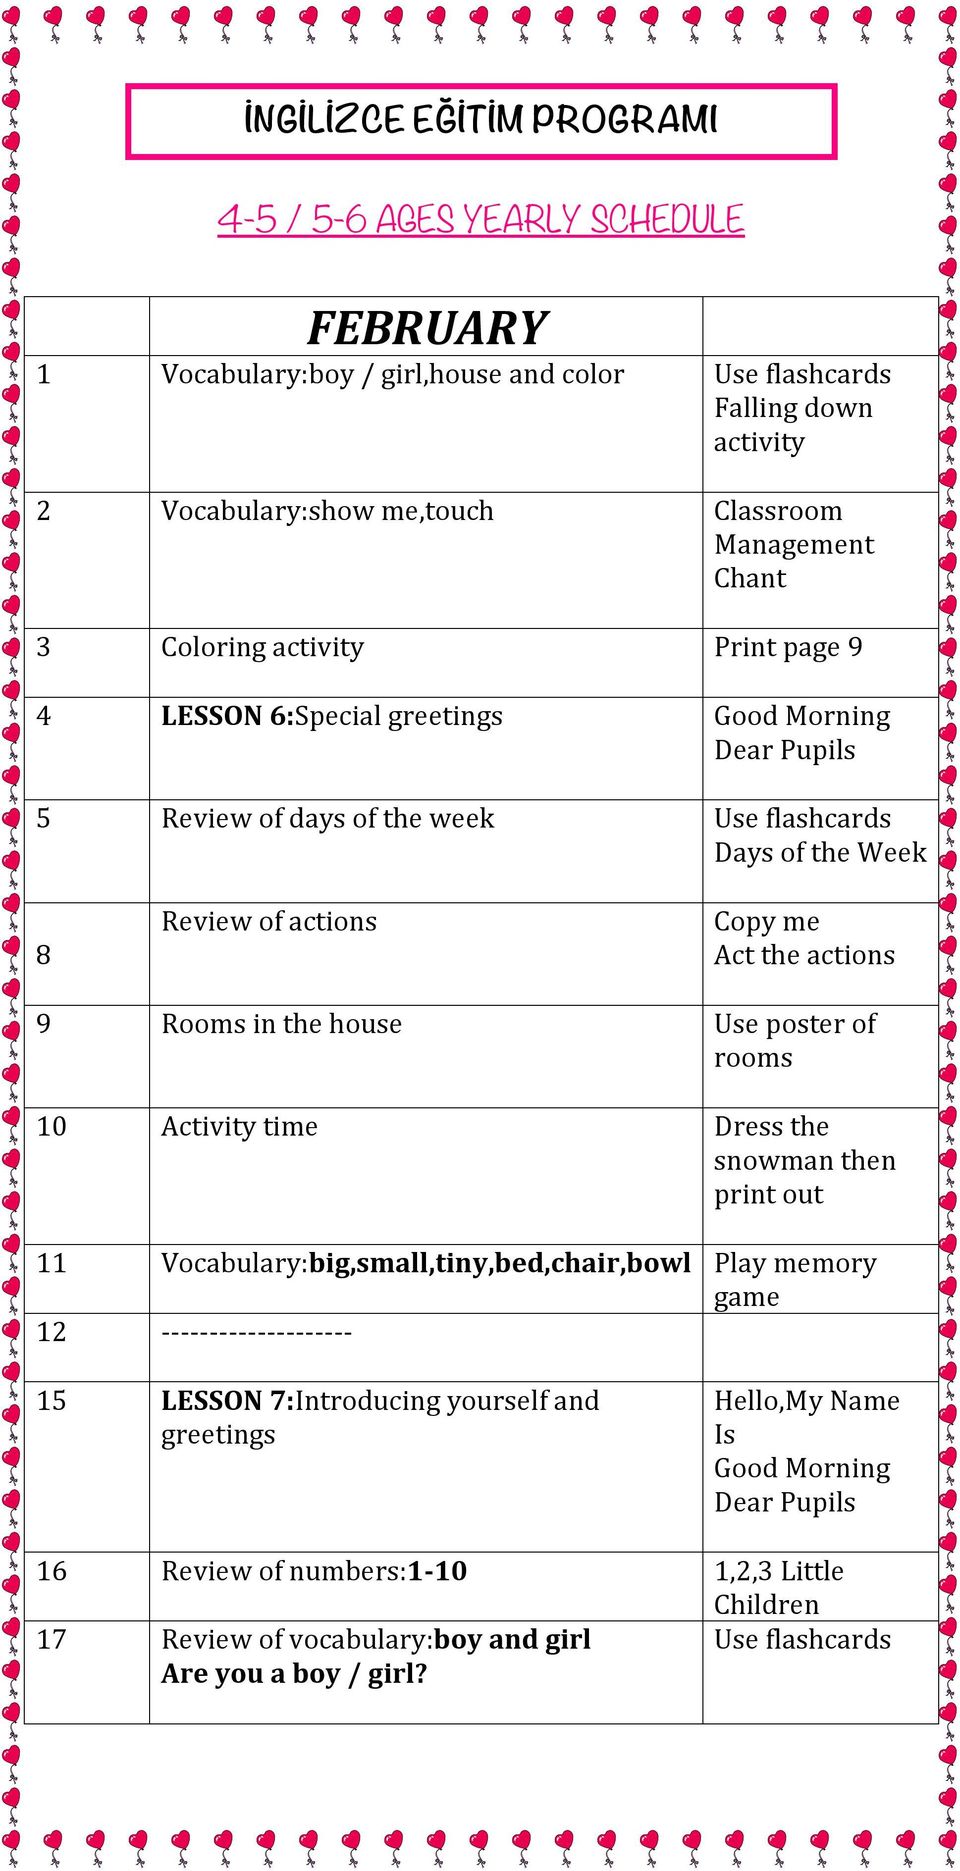 actions 9 Rooms in the house Use poster of rooms 10 Activity time Dress the snowman then print out 11 Vocabulary:big,small,tiny,bed,chair,bowl Play memory game 12 -------------------- 15 LESSON